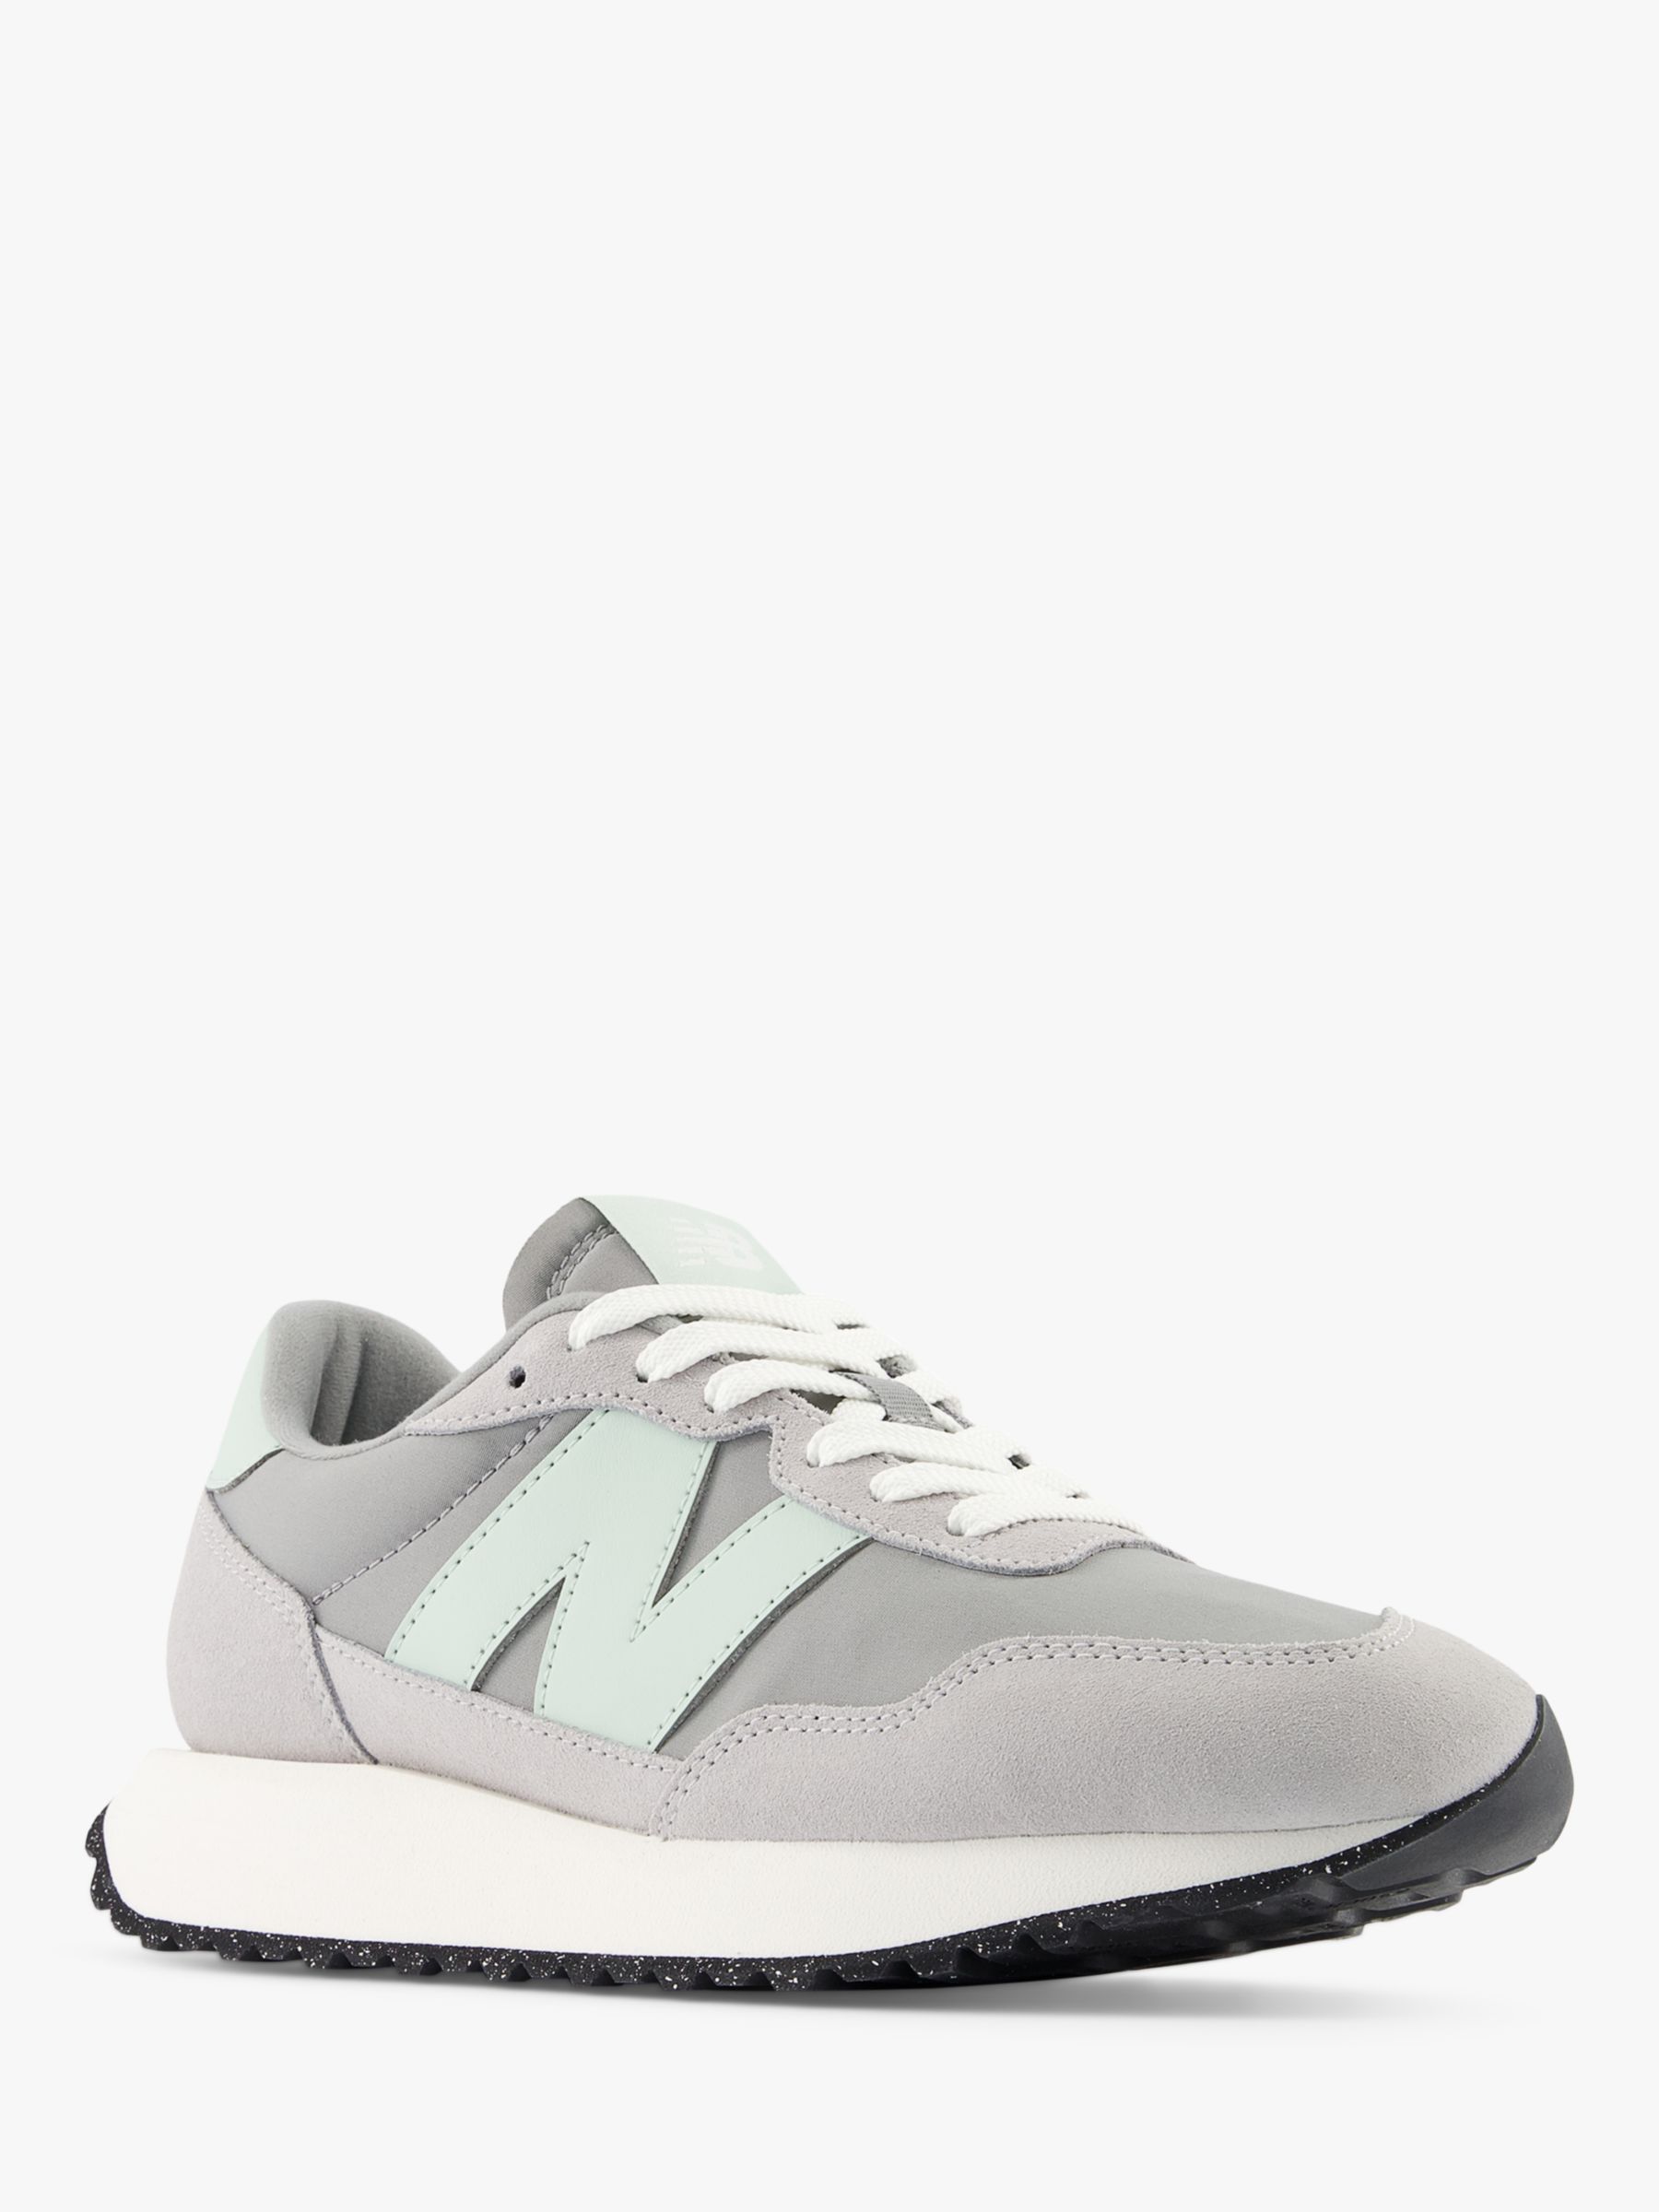 Buy New Balance 237 Suede Mesh Trainers Online at johnlewis.com